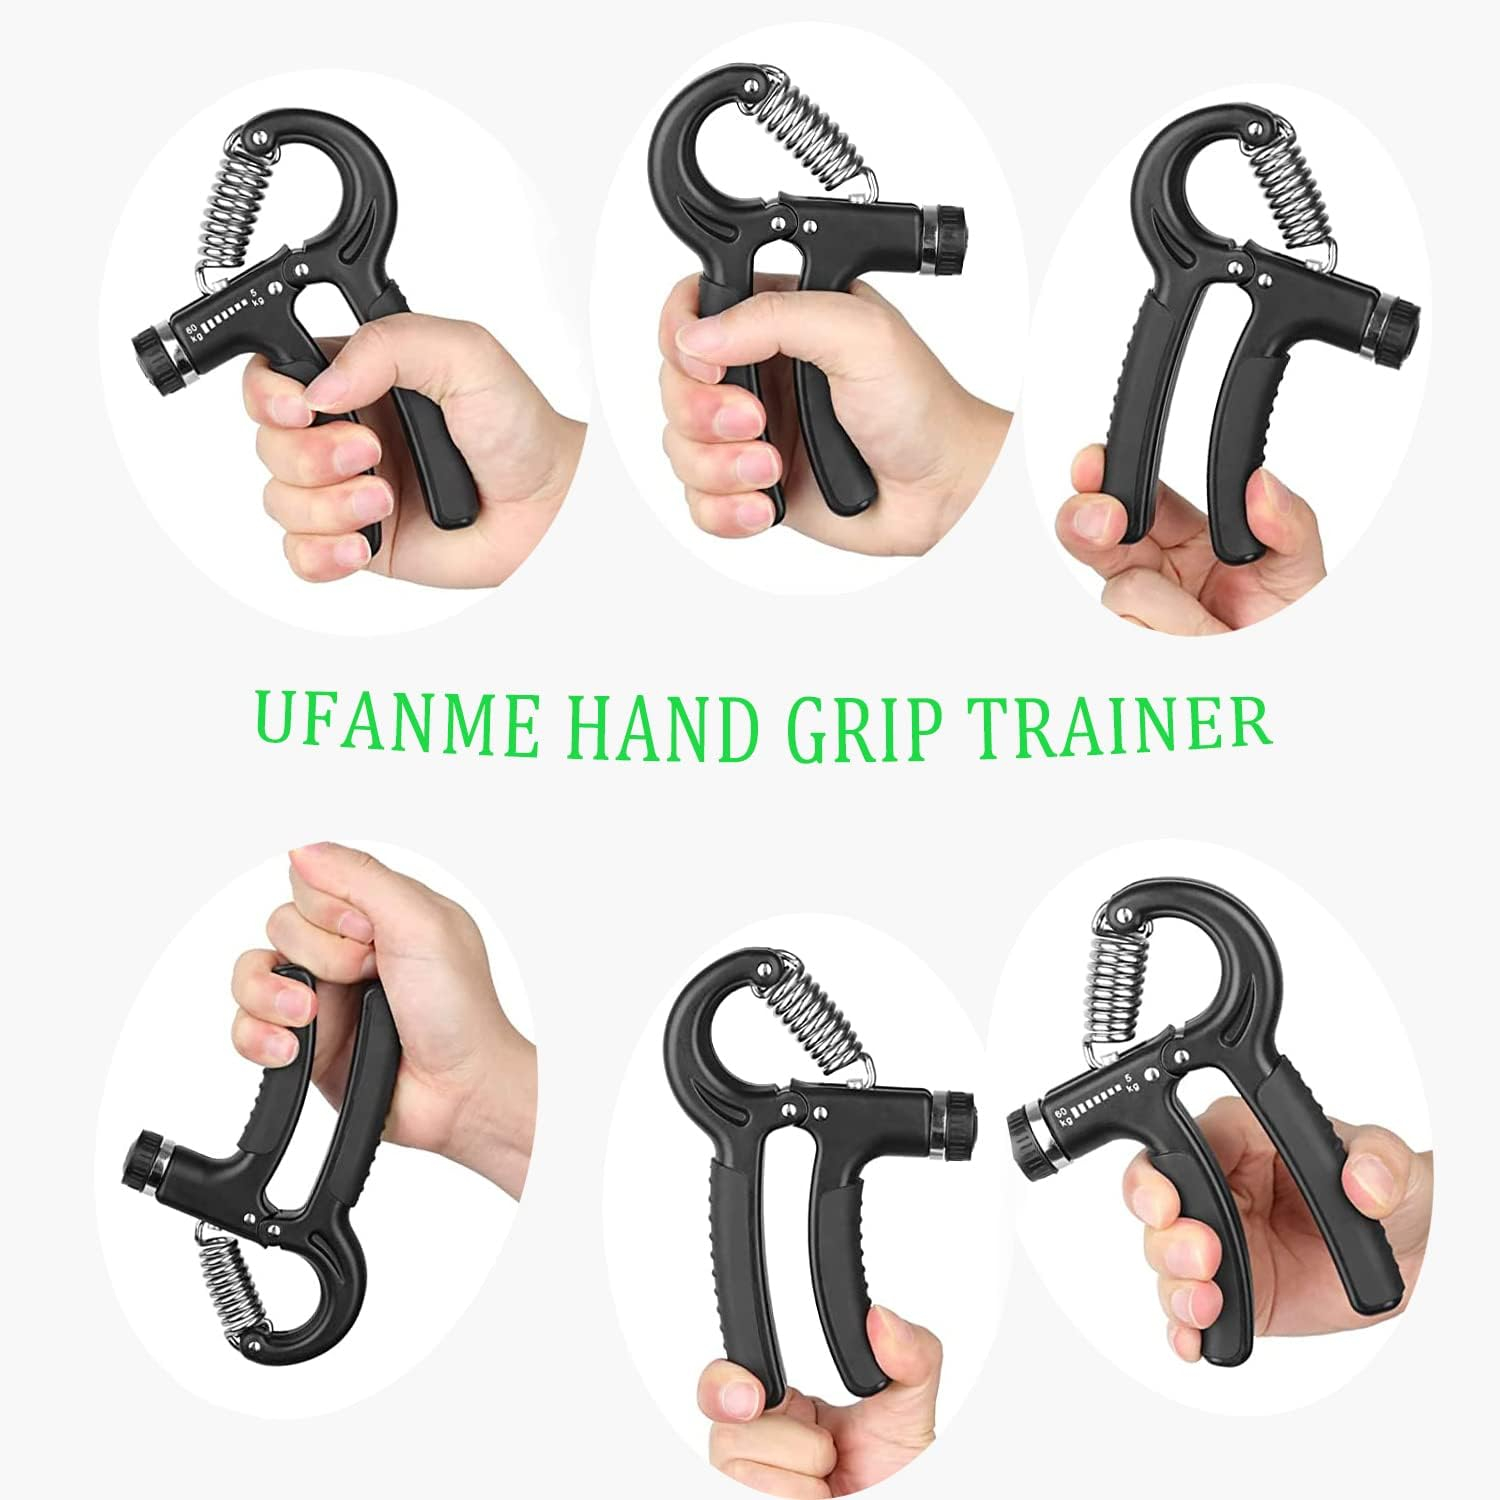 UFANME Hand Grip Strengthener, Grip Strength Trainer, 22-132 Lbs Adjustable Resistance Forearm Exerciser Workout for Rehabilitation Athletes Climbers Musicians